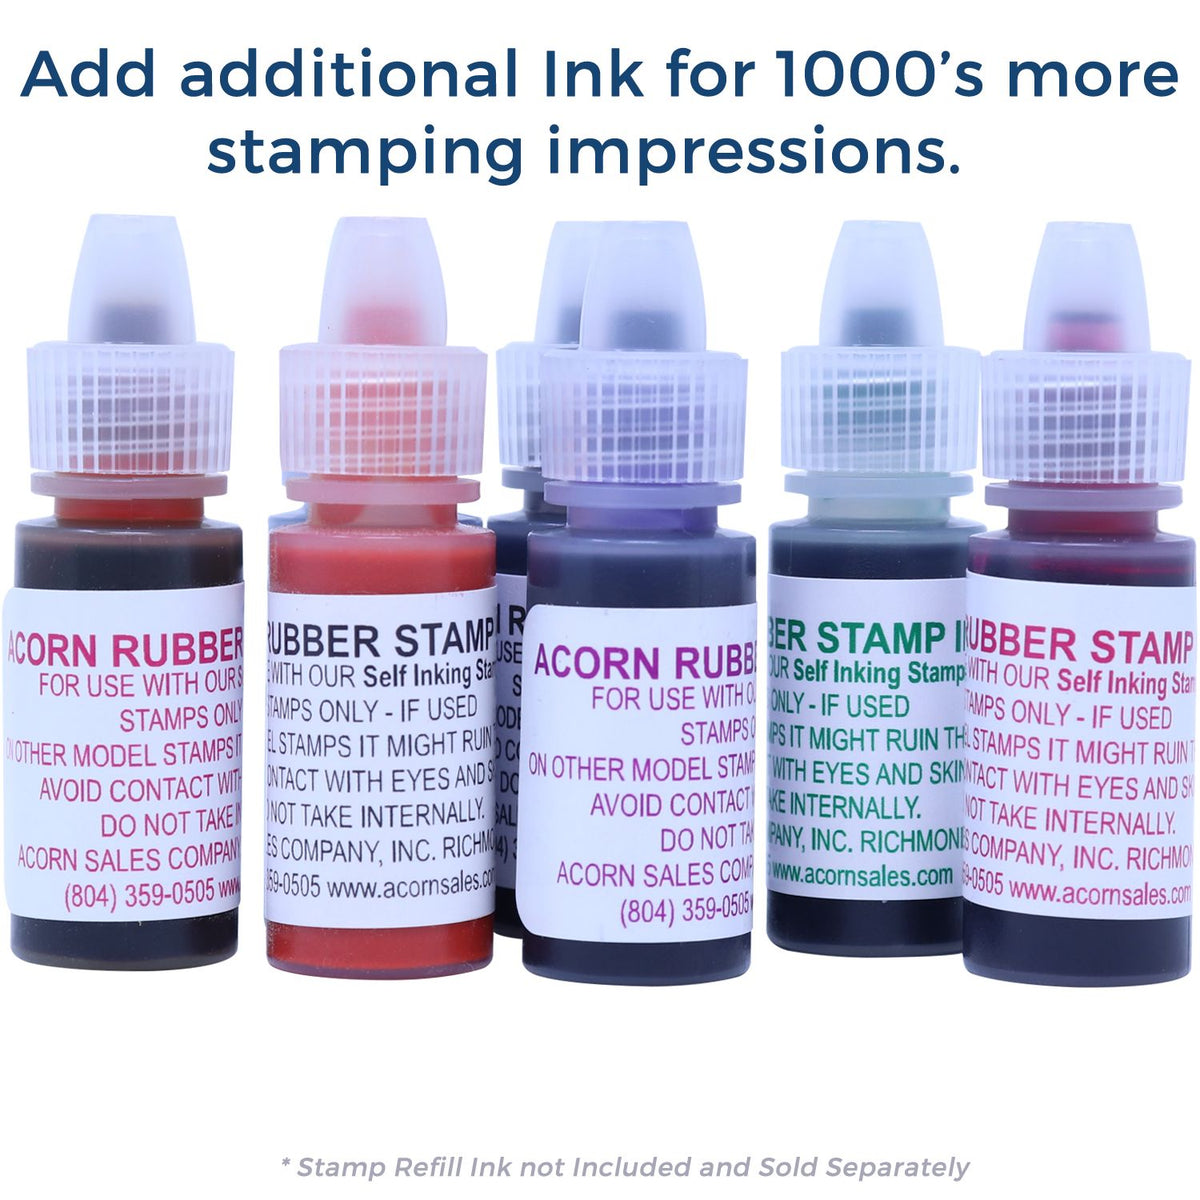 Refill Ink for Self-Inking Round Entered Stamp Available